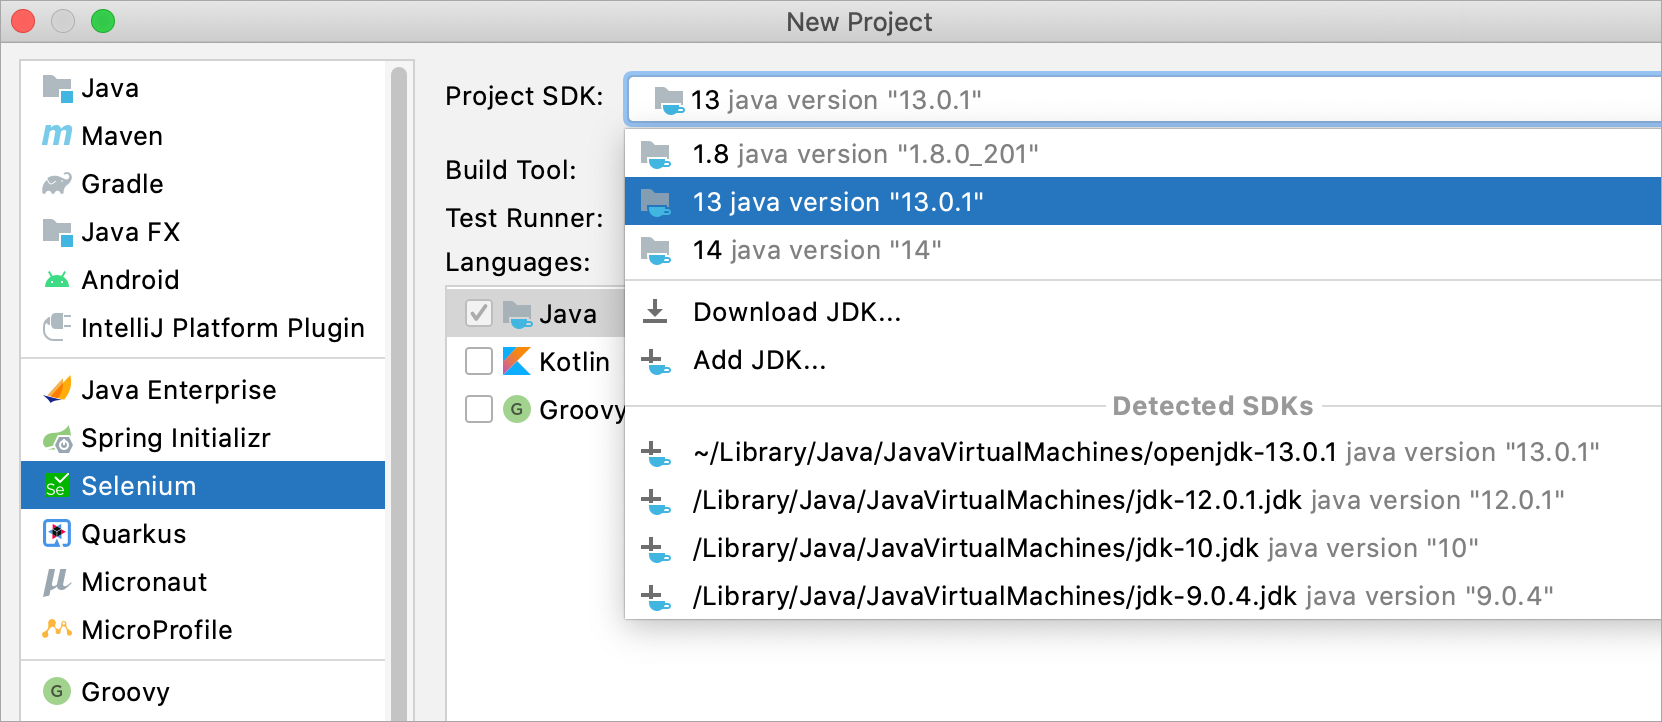 Configuring a JDK for a new Selenium project